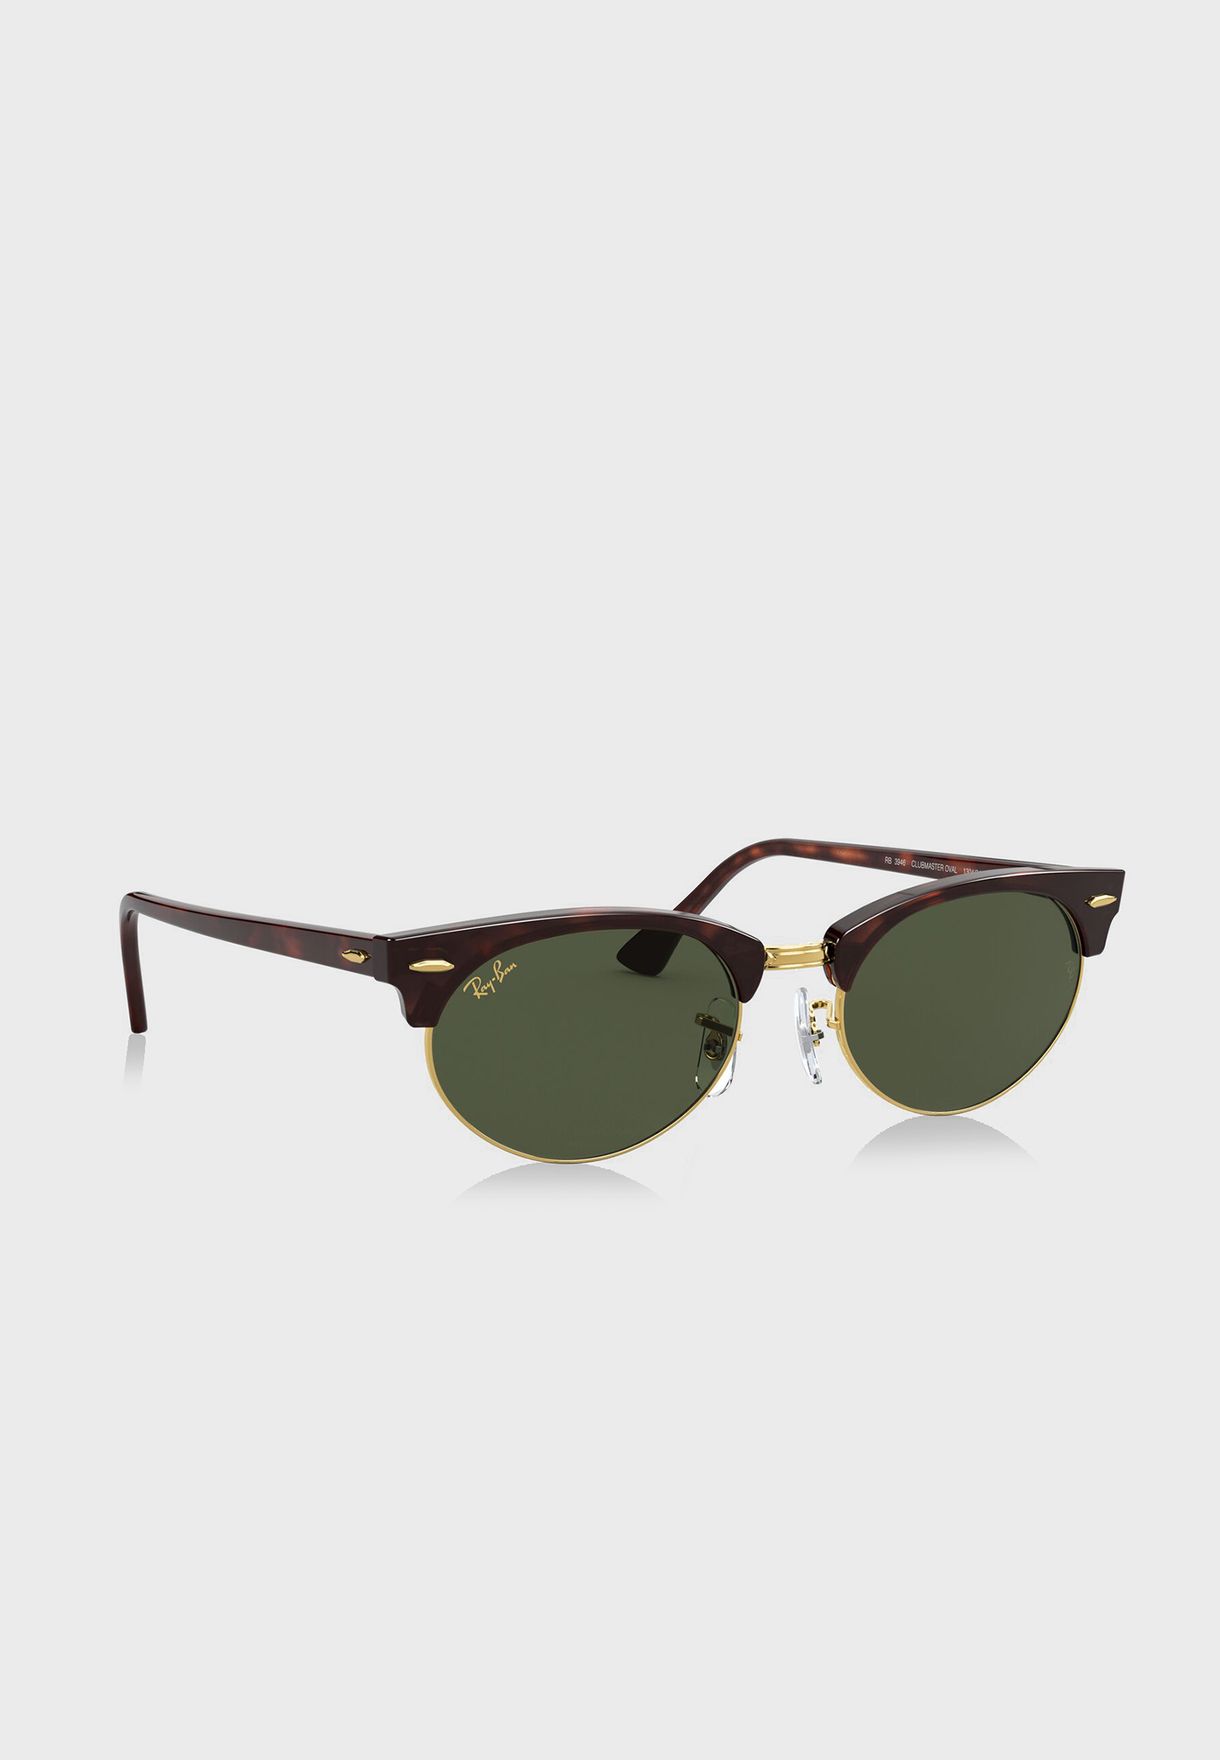 0Rb3946 Clubmaster Sunglasses